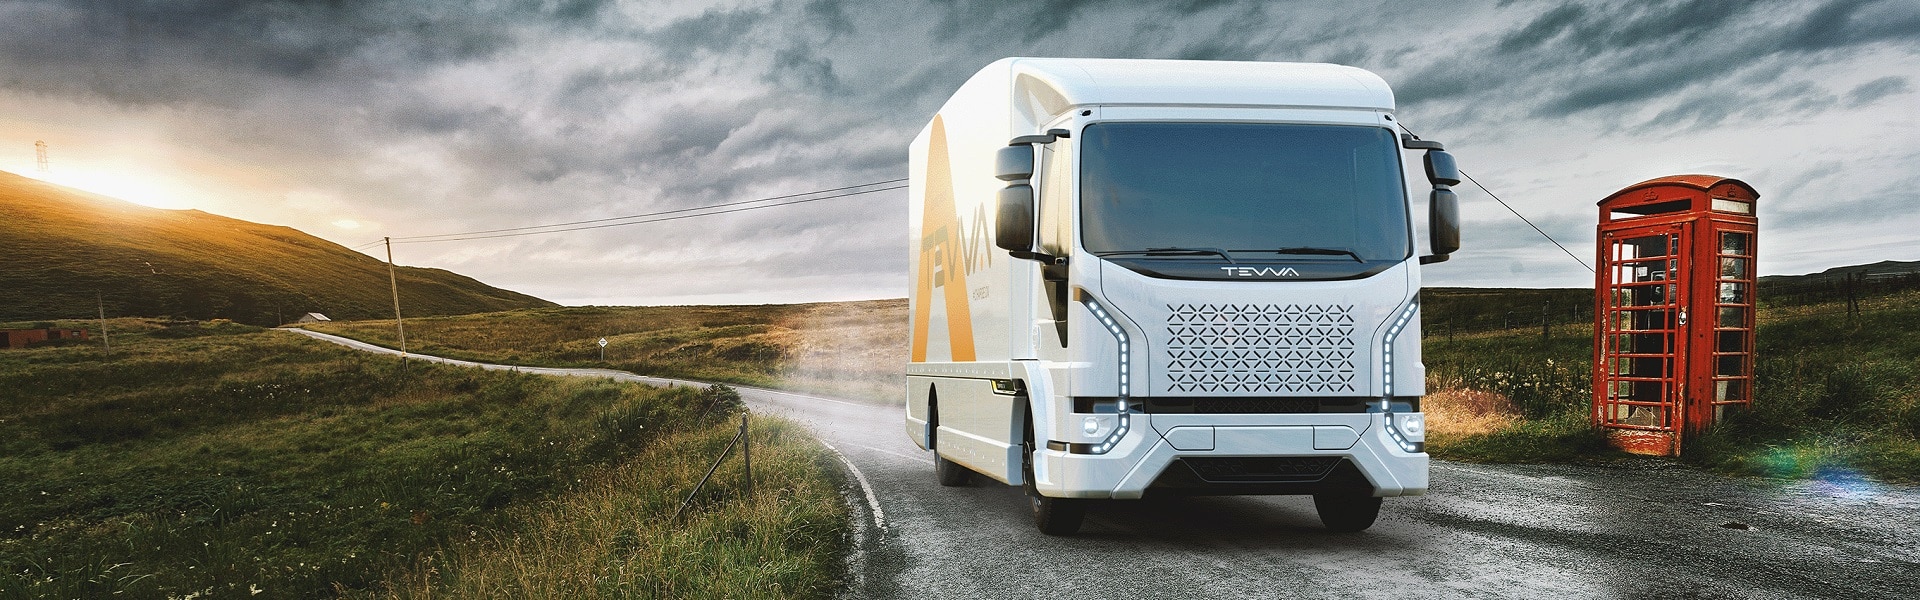 Tevva Selects RISE With SAP S/4HANA Cloud To Help Accelerate Delivery Of Zero-Emission Trucking In The UK